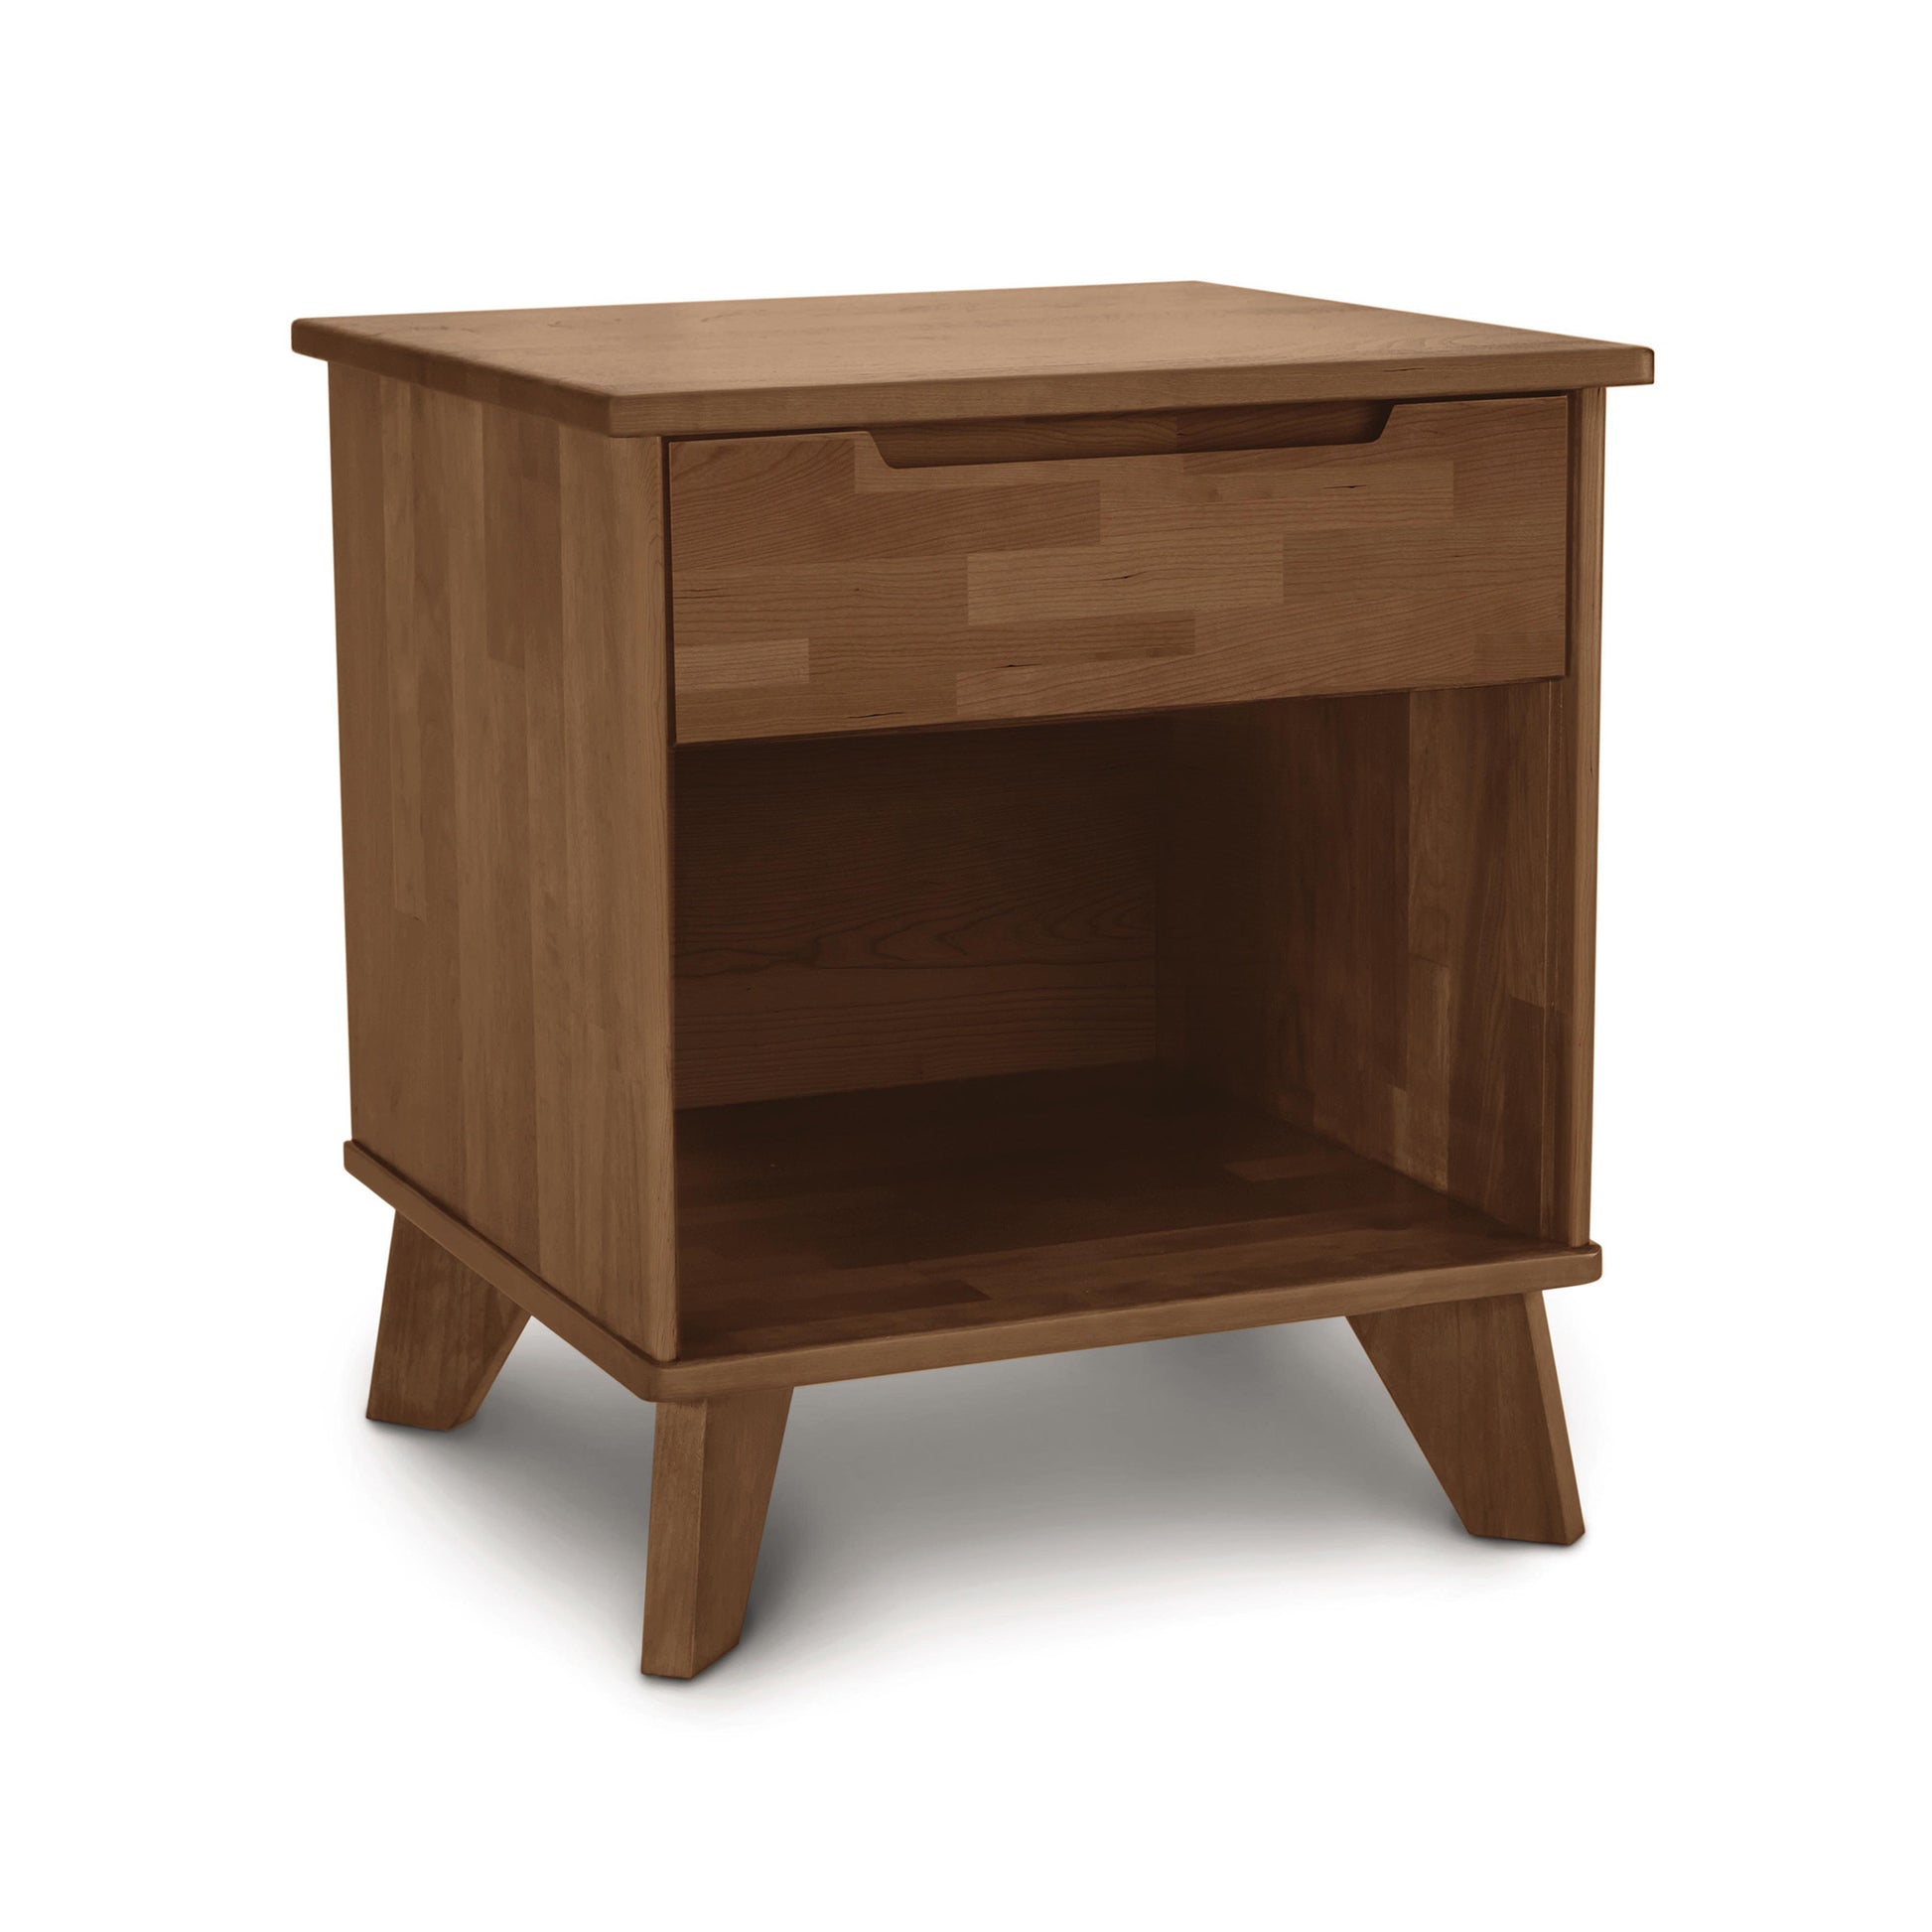 A sustainable solid wood Copeland Furniture Linn 1-Drawer Enclosed Shelf Nightstand with a single closed drawer and an open shelf on a white background.